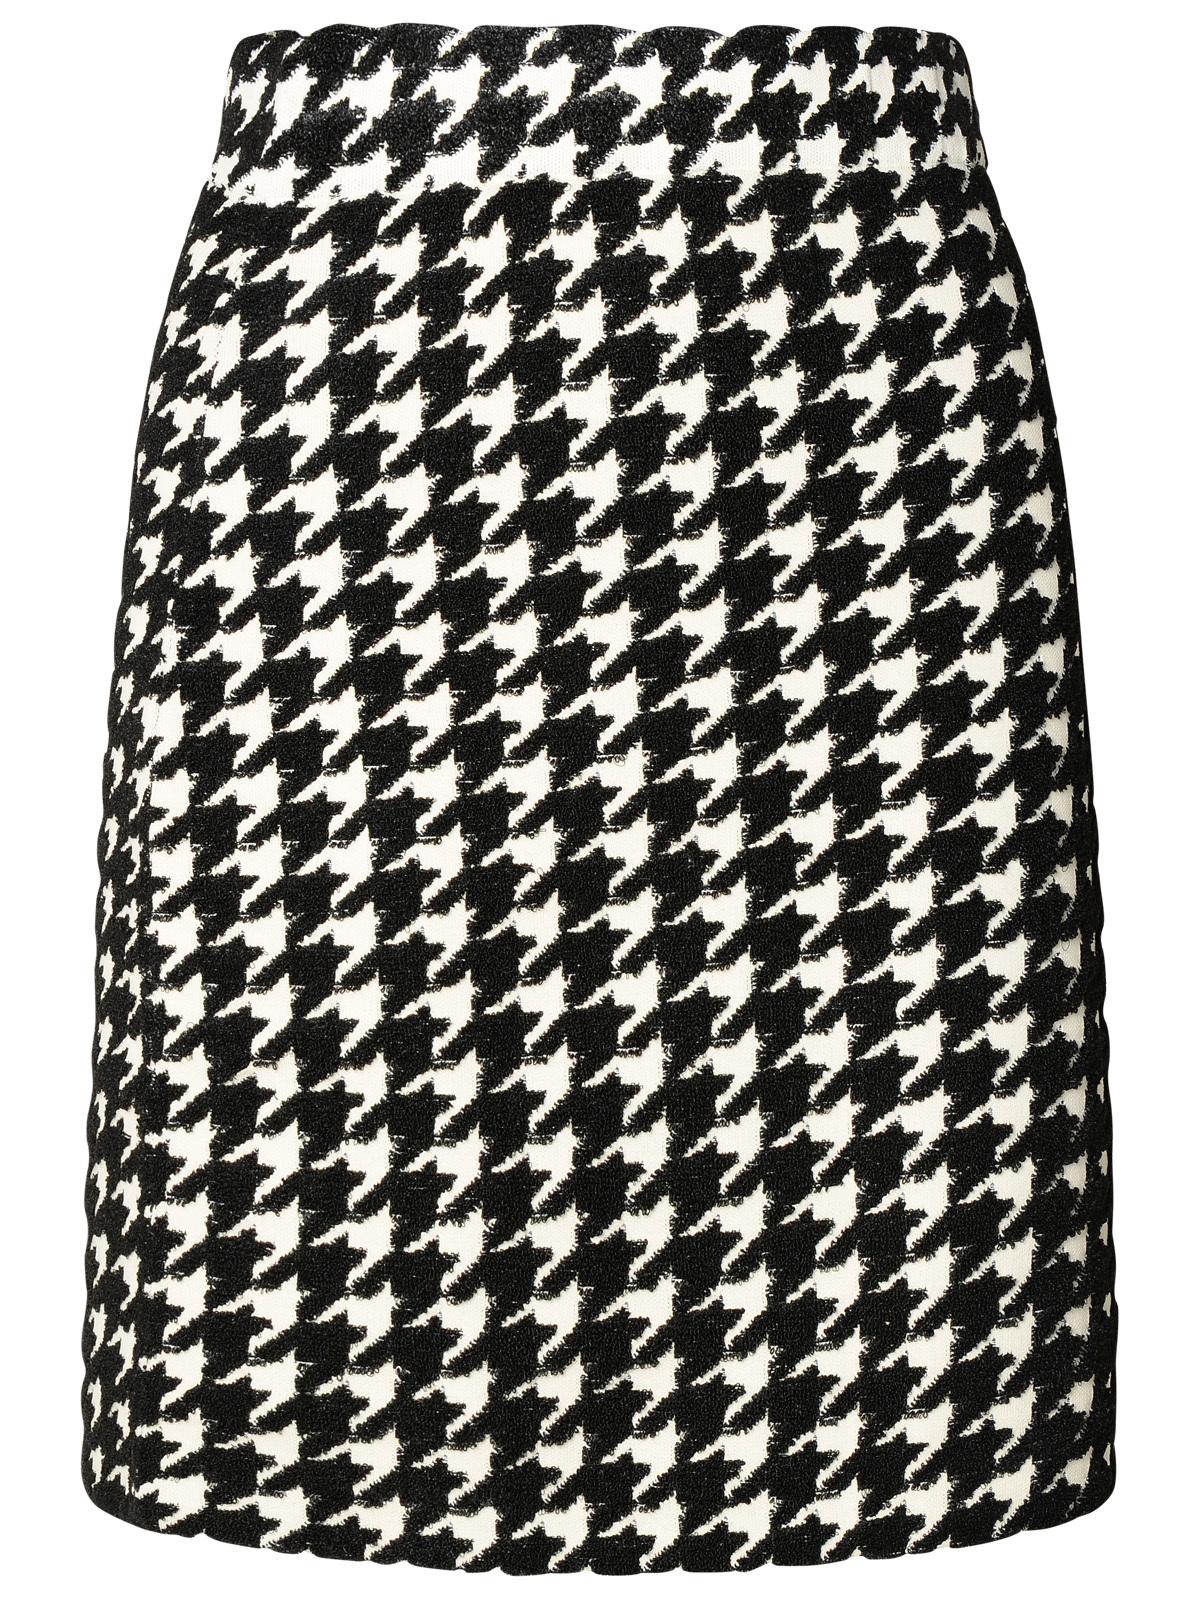 Burberry Black Viscose Blend Skirt Woman In Multicolor